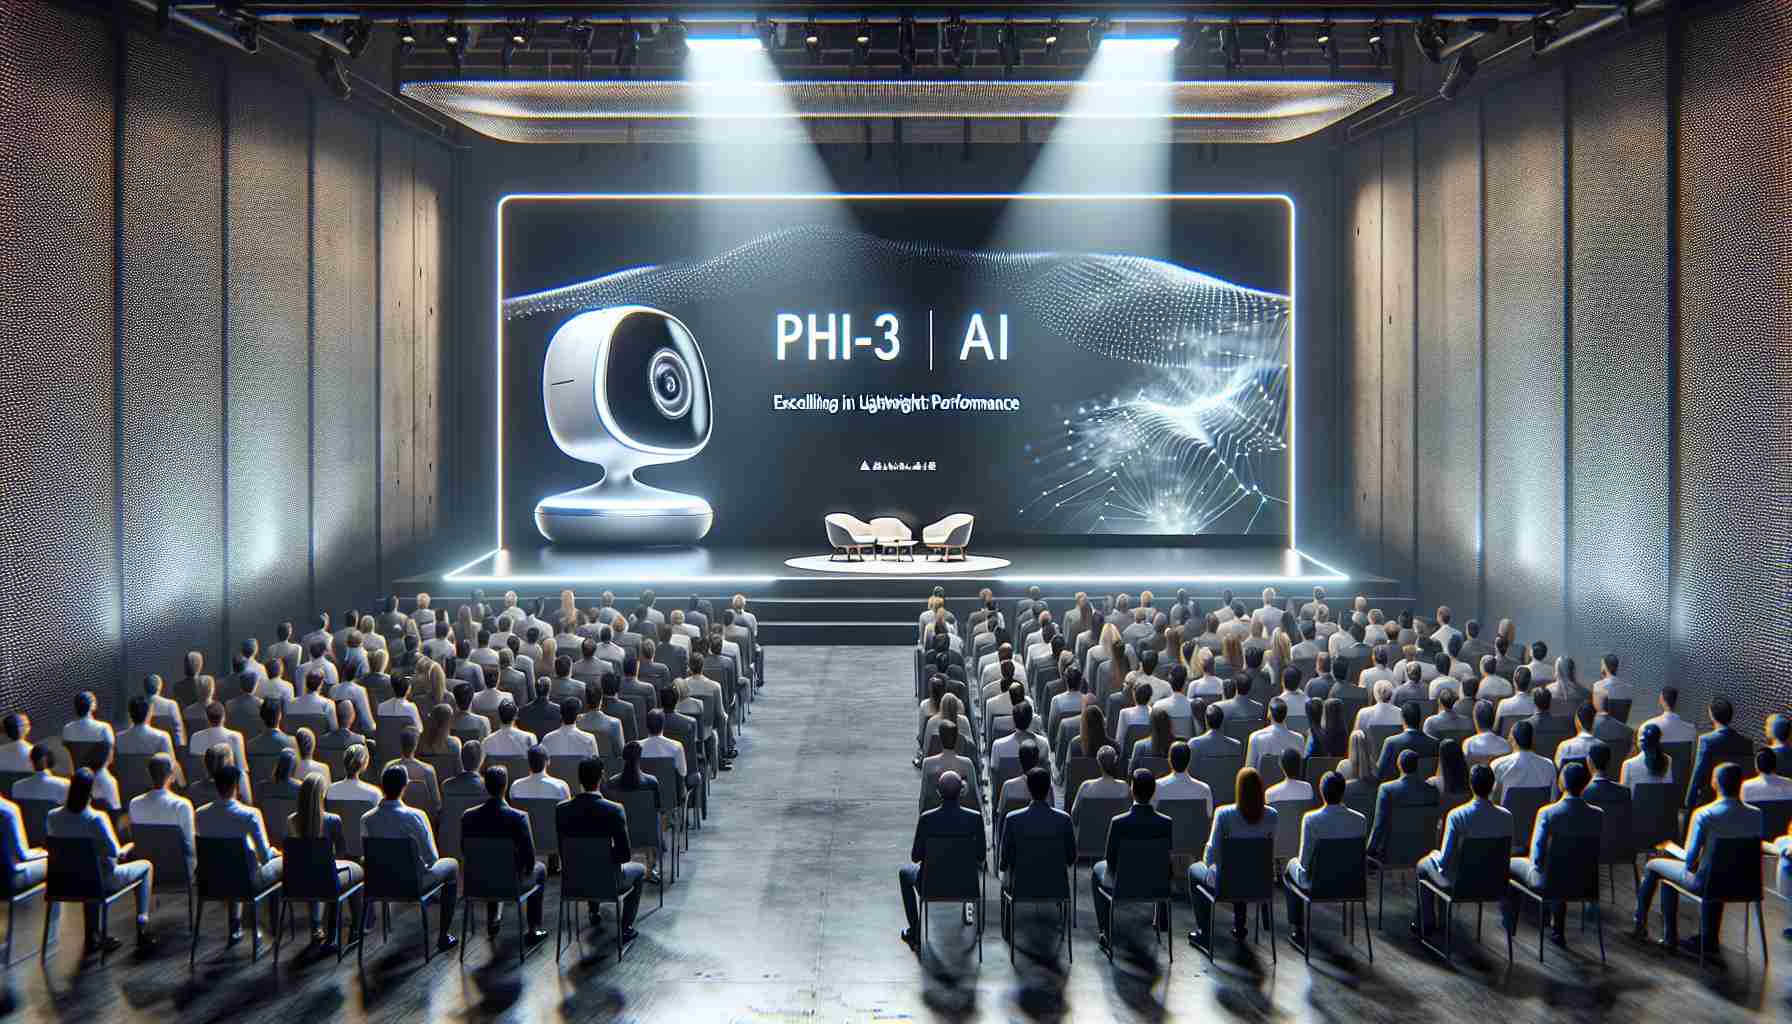 Microsoft Unveils Phi-3 AI Series, Exceling in Lightweight Performance